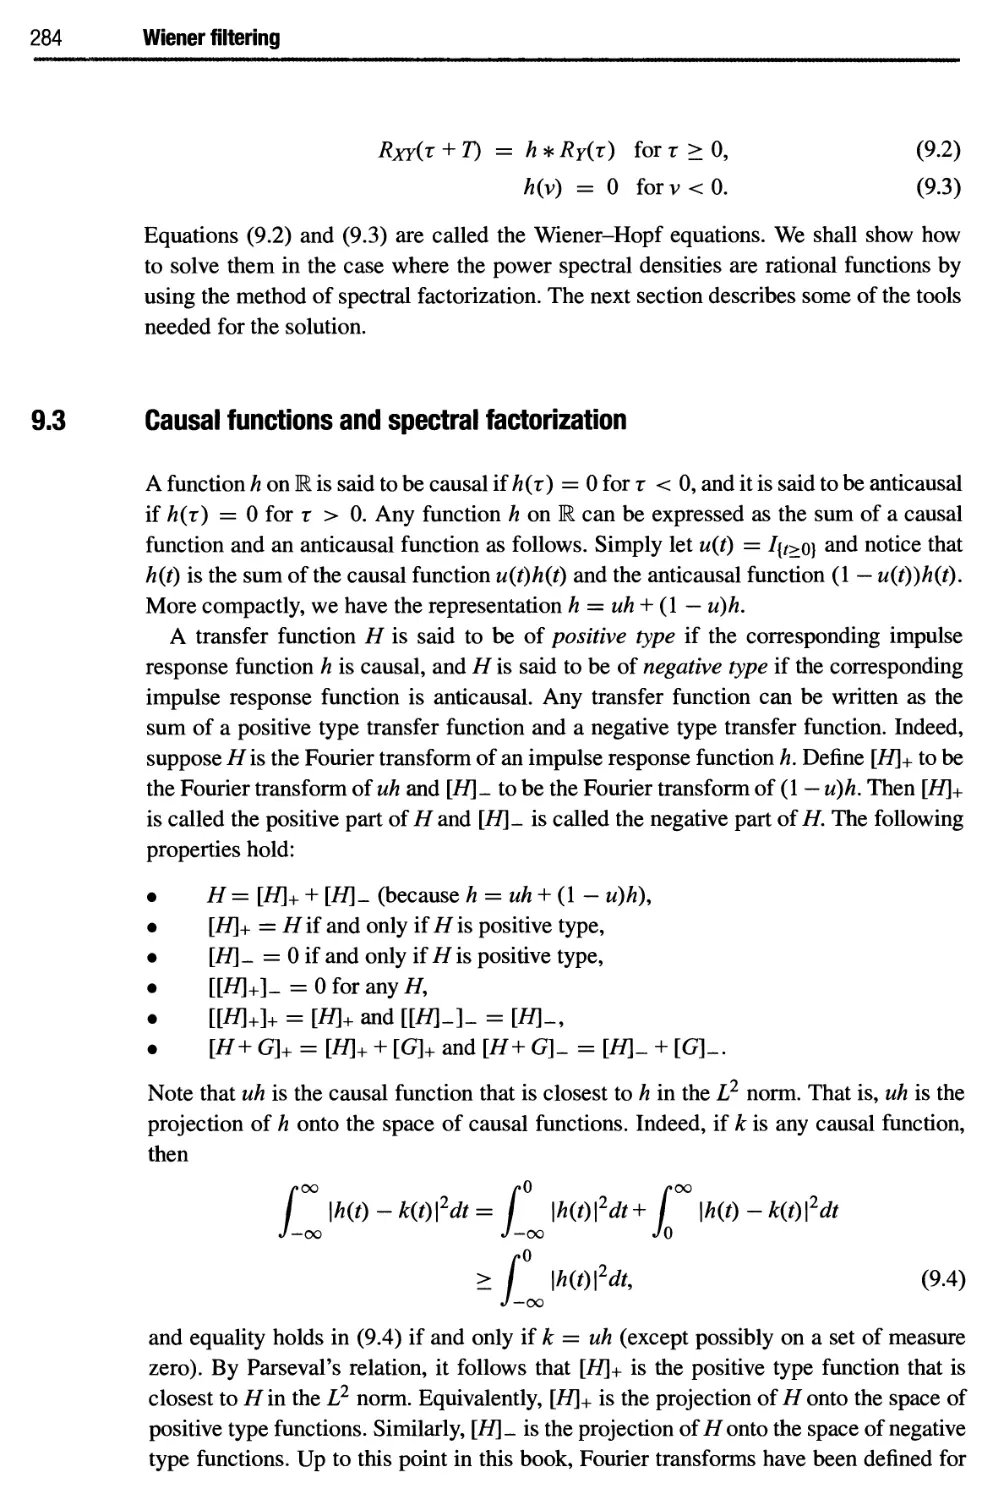 9.3 Causal functions and spectral factorization 284